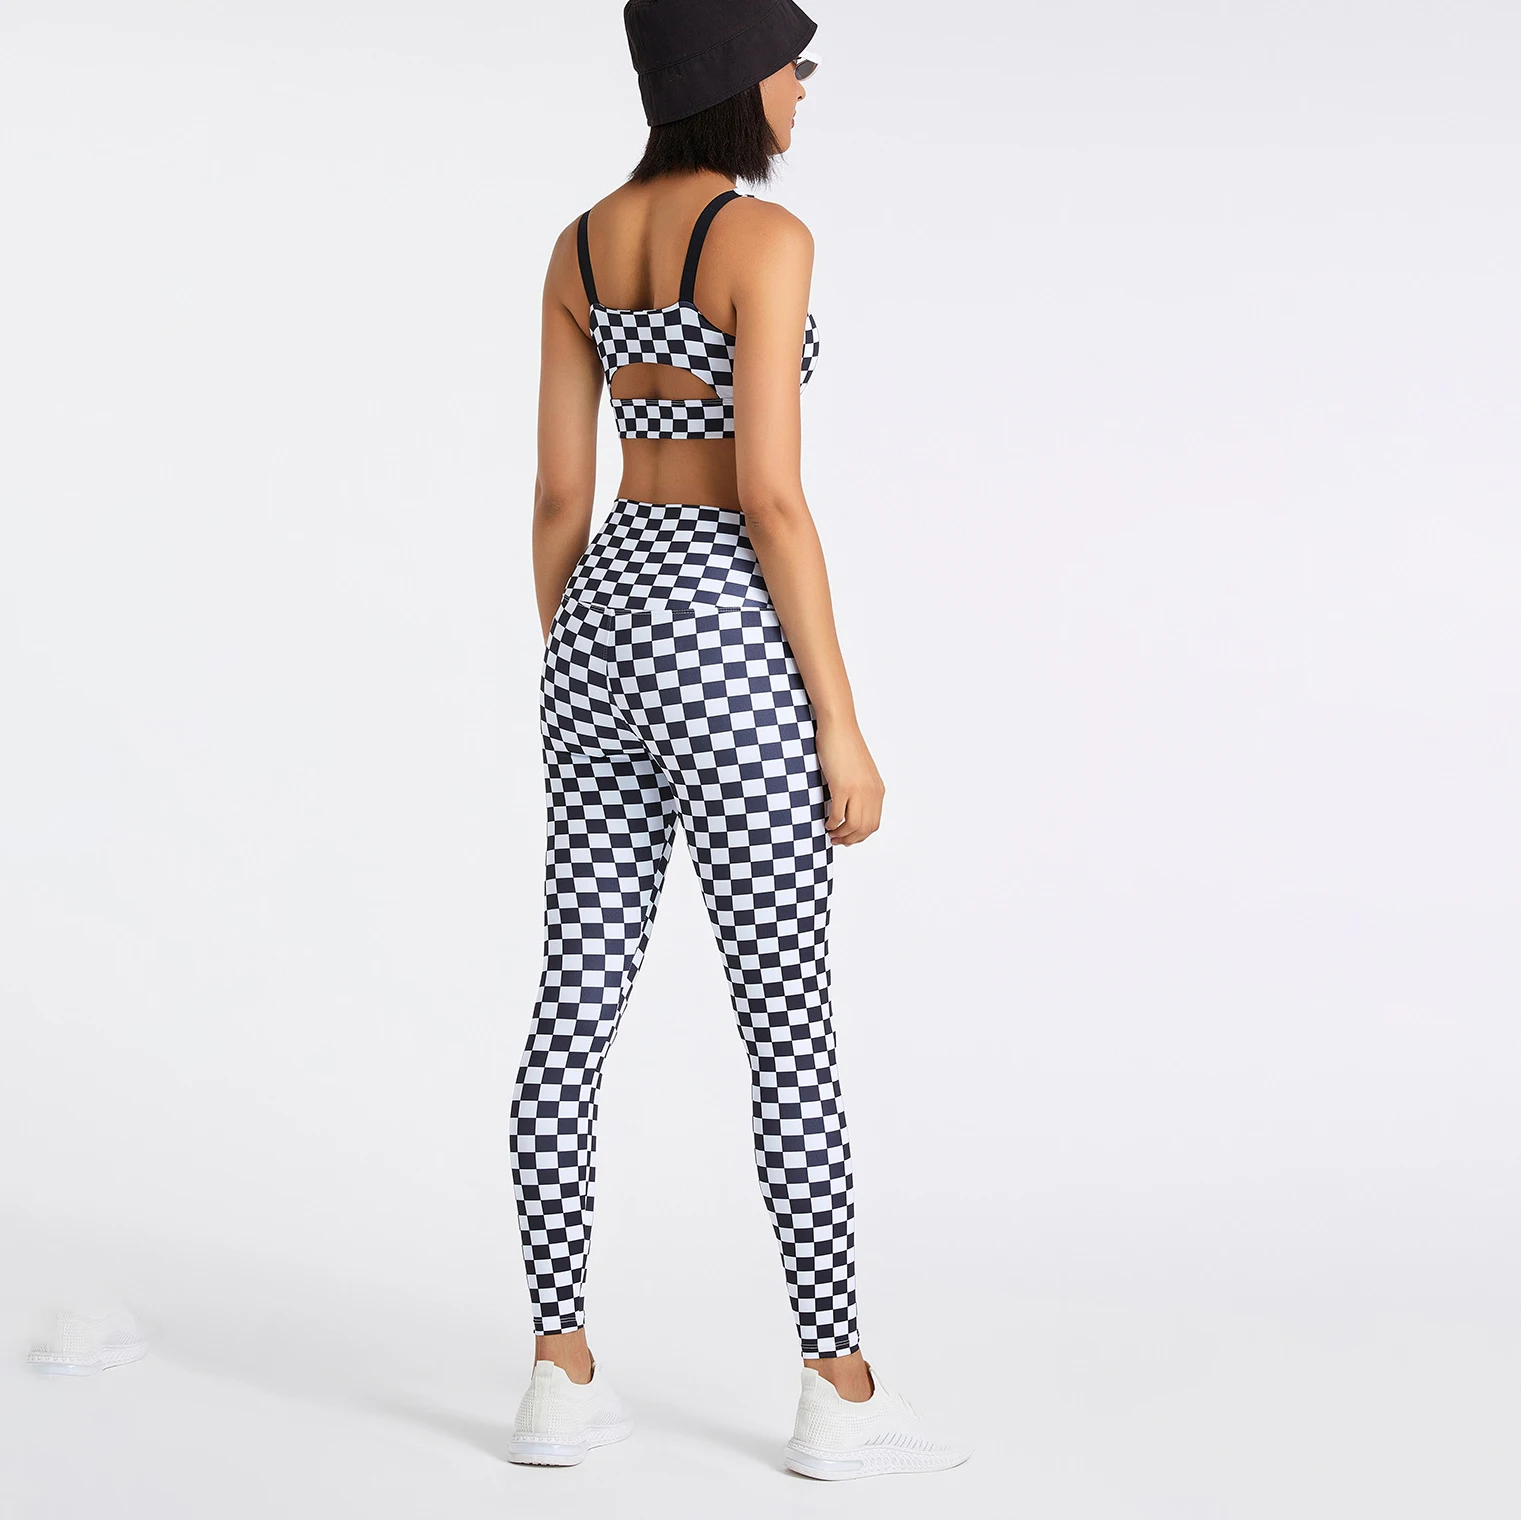 YIYI New Arrival Printing High Stretch Leggings Sets For Women High Quality Breathable Gym Suits Plaid 2 Piece Set Gym Women